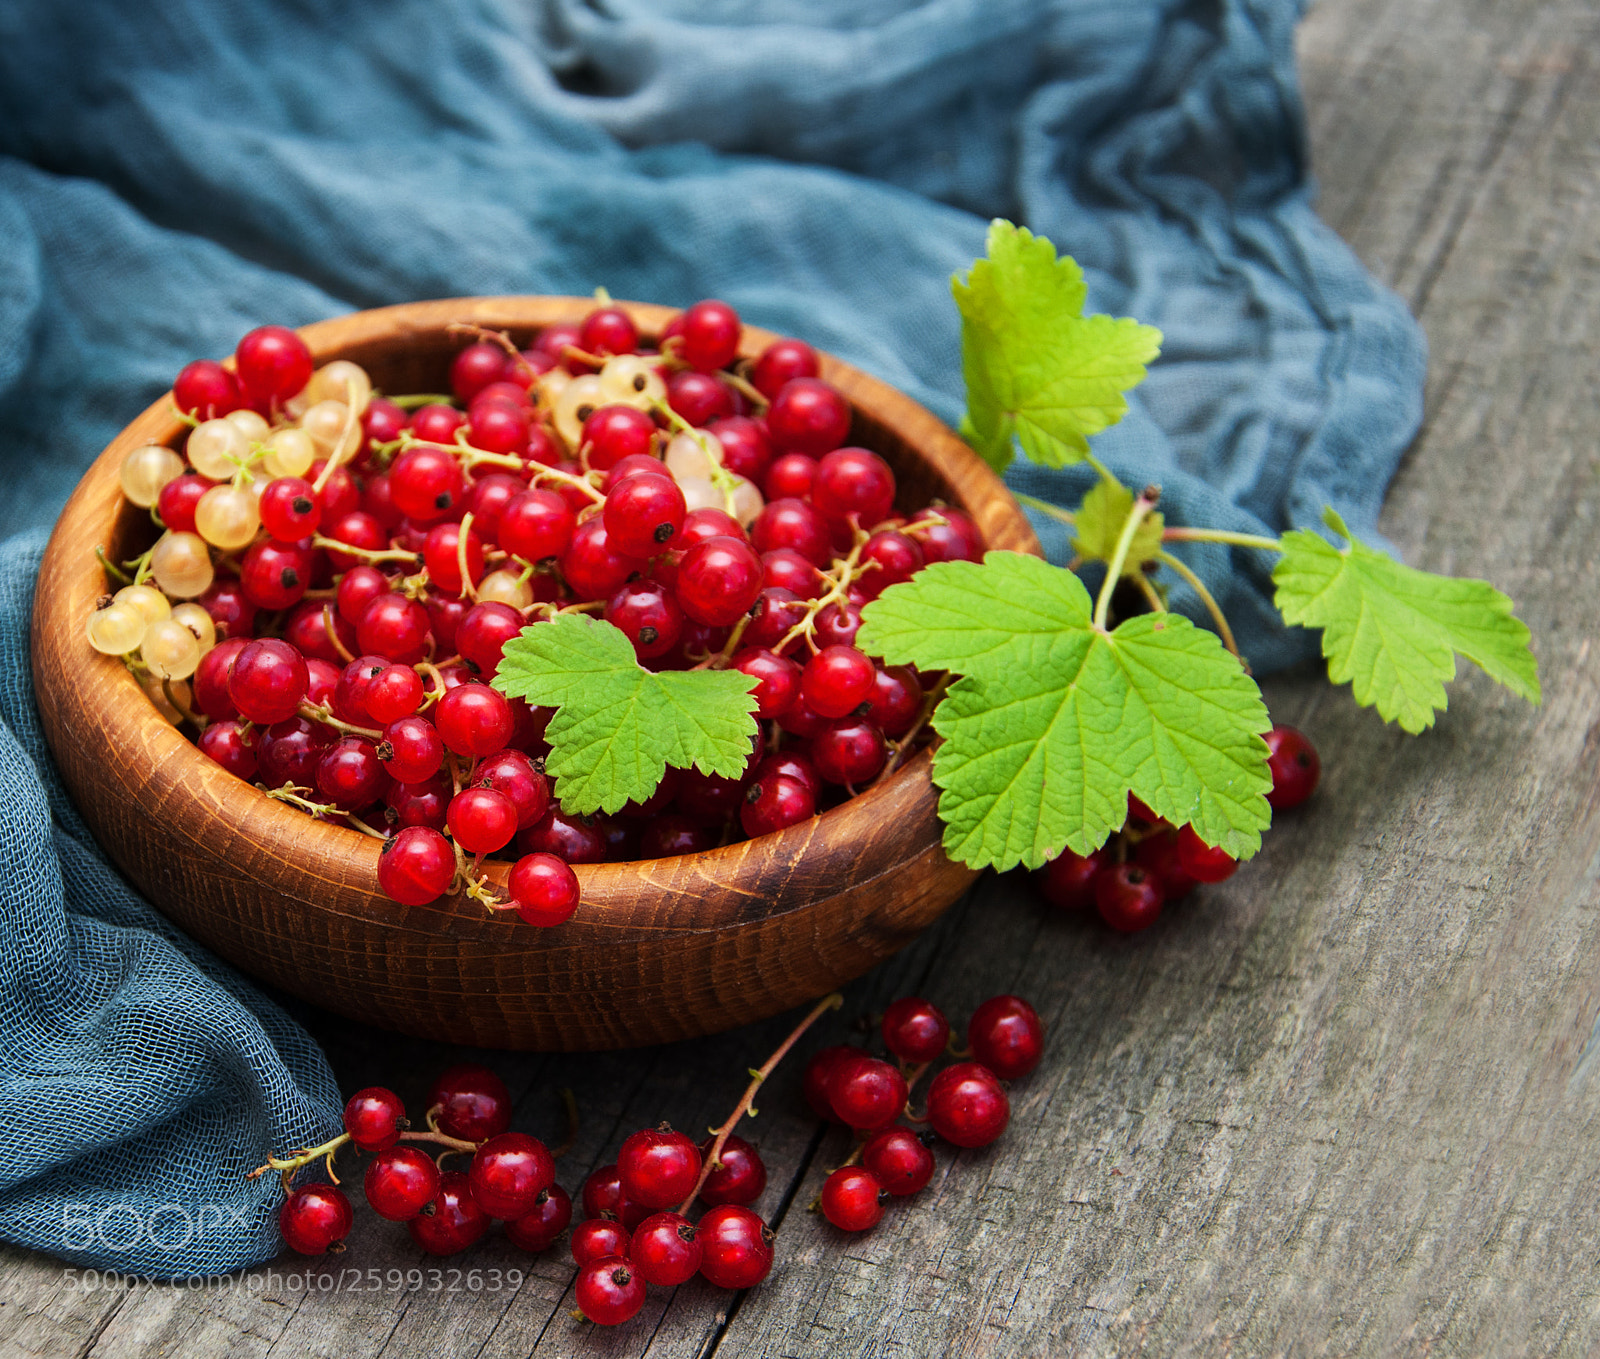 Nikon D90 sample photo. Bowl with red currant photography